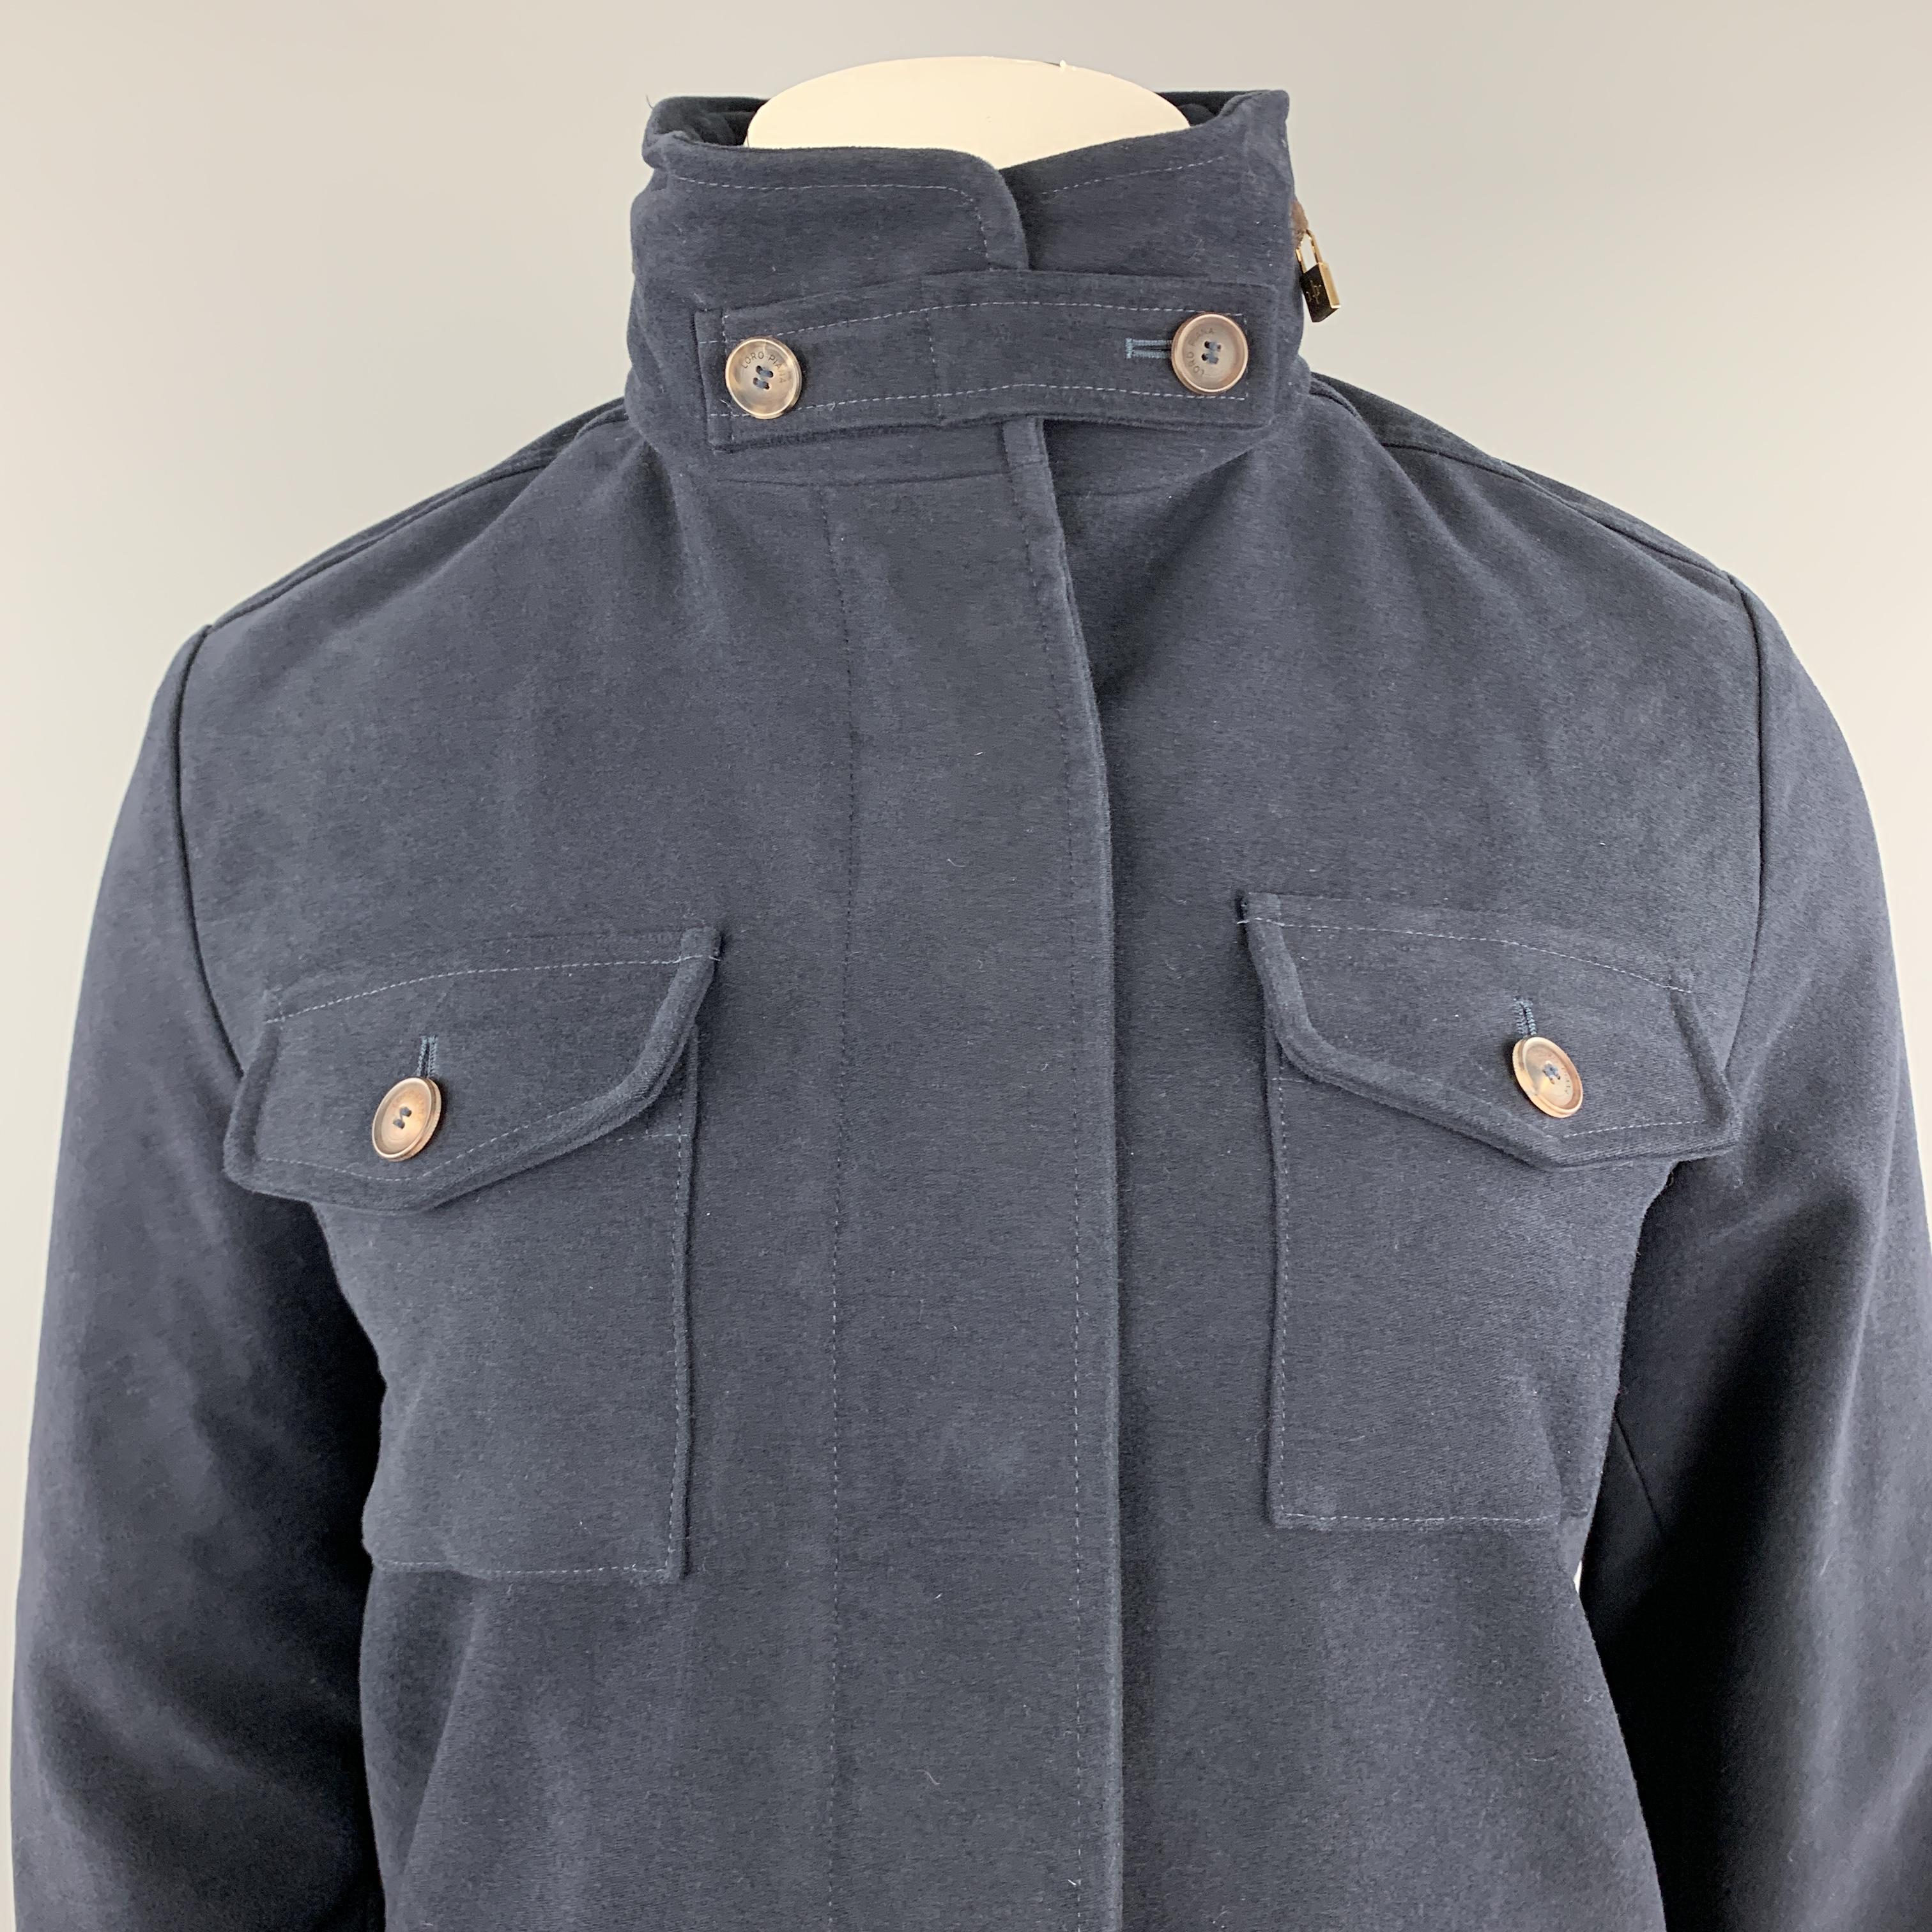 LORO PIANA jacket comes in navy cotton with a high button collar, hidden placket front, patch flap pockets, and zi pout hood with suede trim. Made in Italy.

Excellent Pre-Owned Condition.
Marked: IT 44

Measurements:

Shoulder: 18 in.
Bust: 44